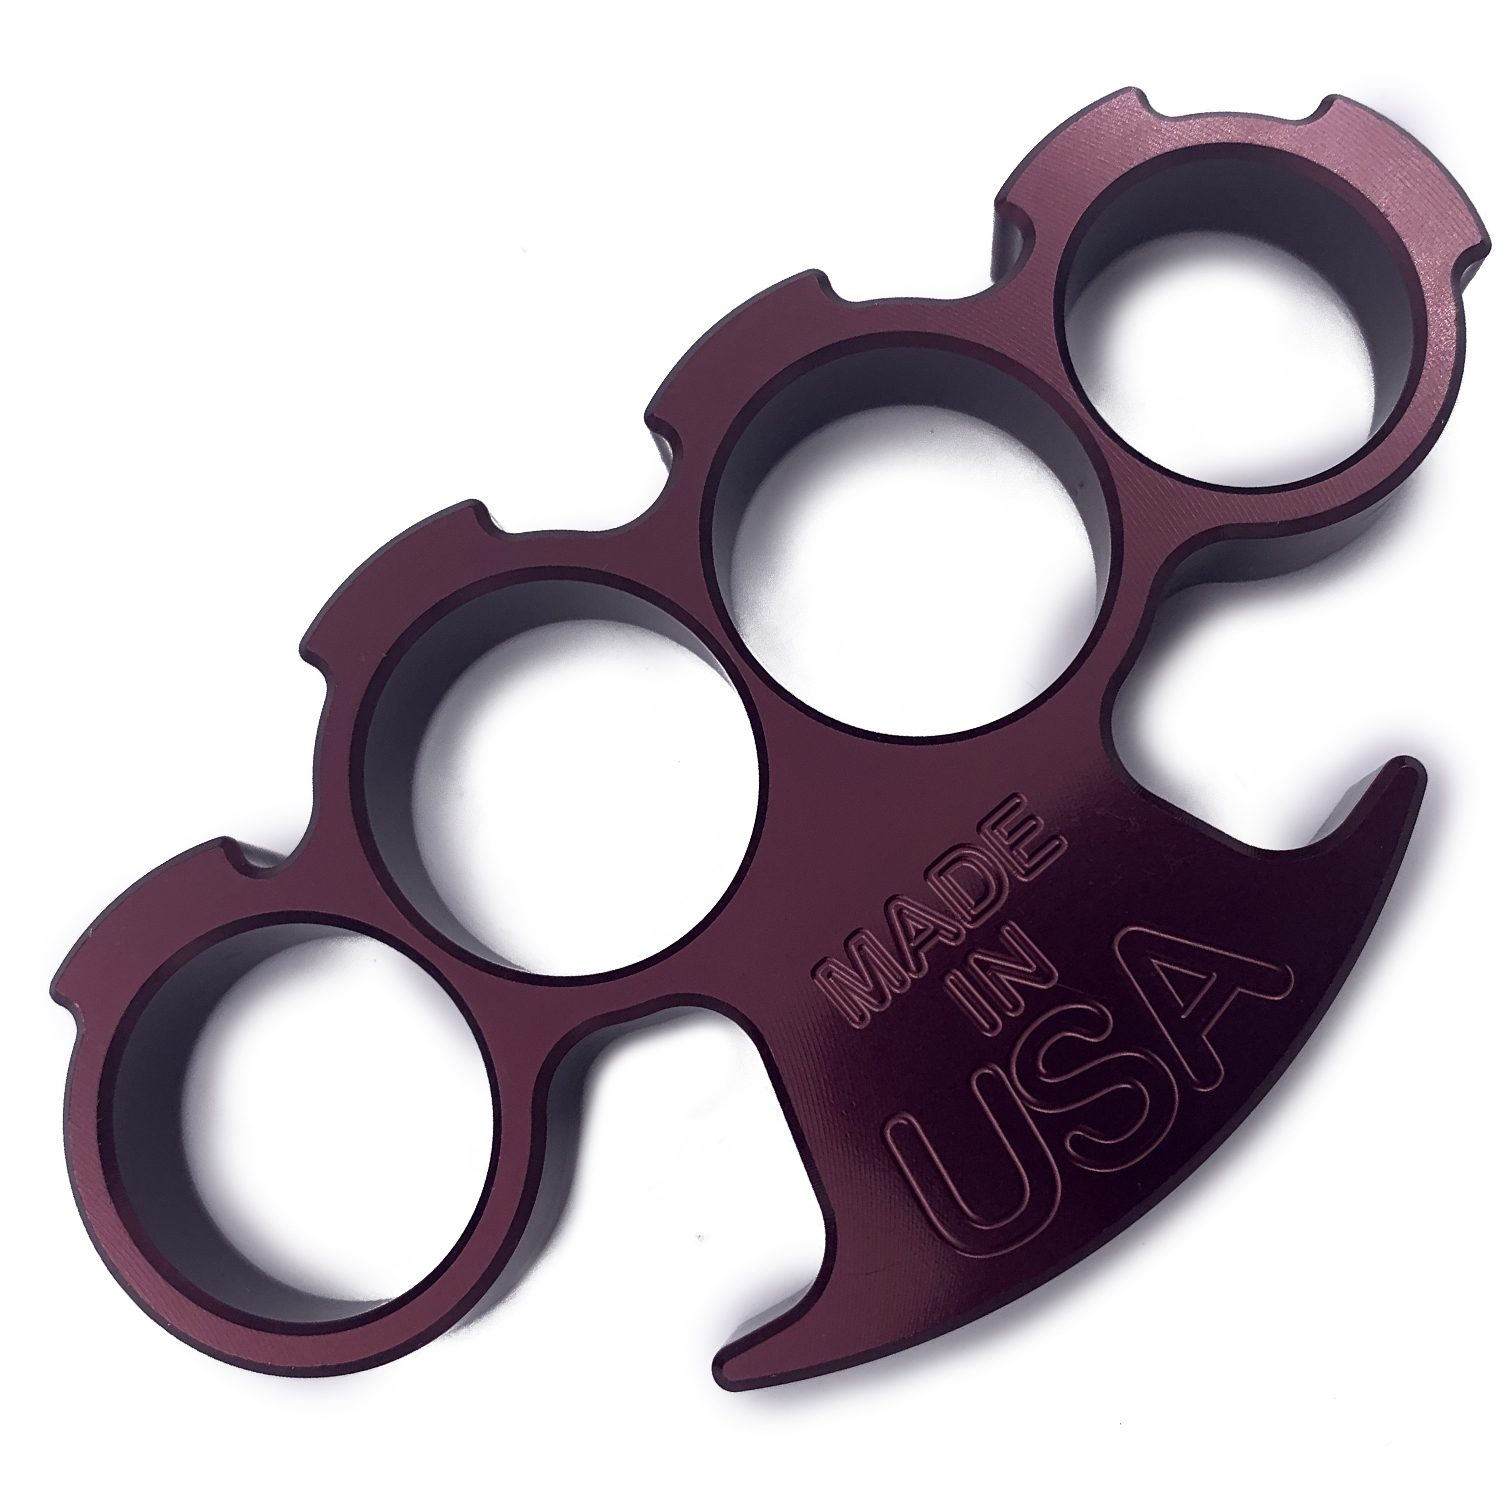 DR PP S American Made Dark Rift Armory CNC Aircraft Aluminum Brass Knuckles Small Purple